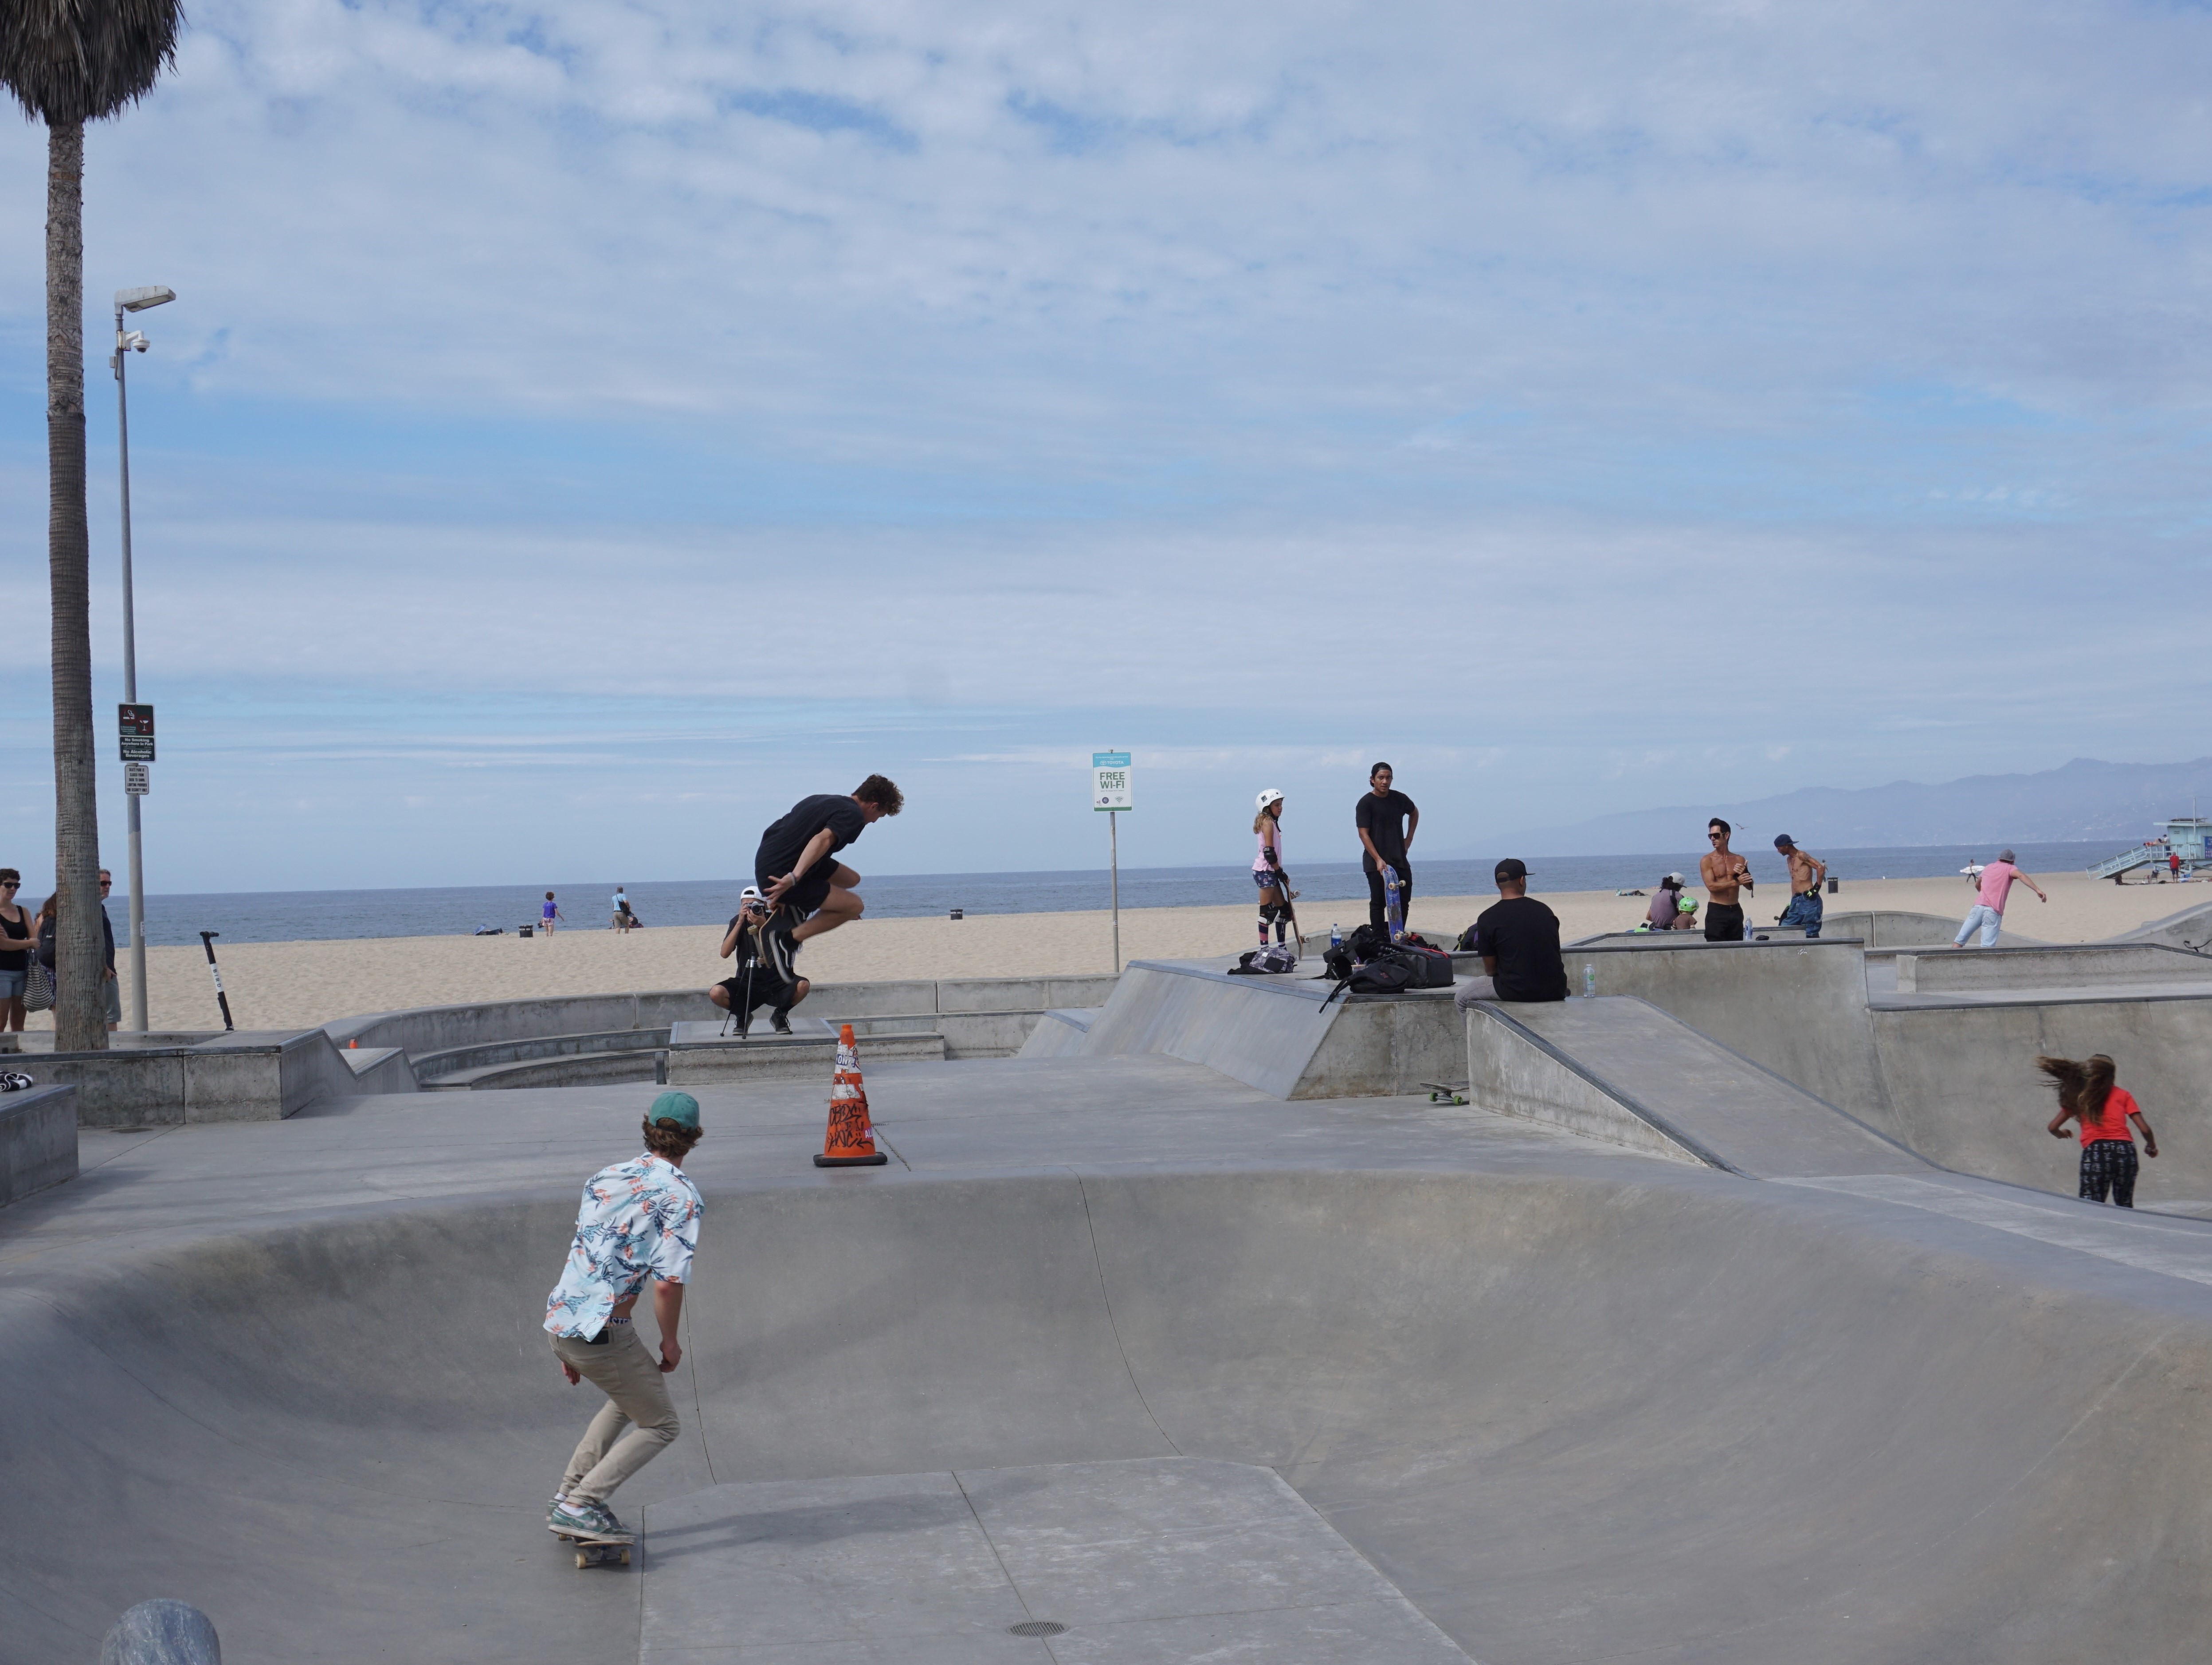 The Venice beach skatepark is a place where you will find both the young and old skateboarding among the ledges while locals and tourists observe.